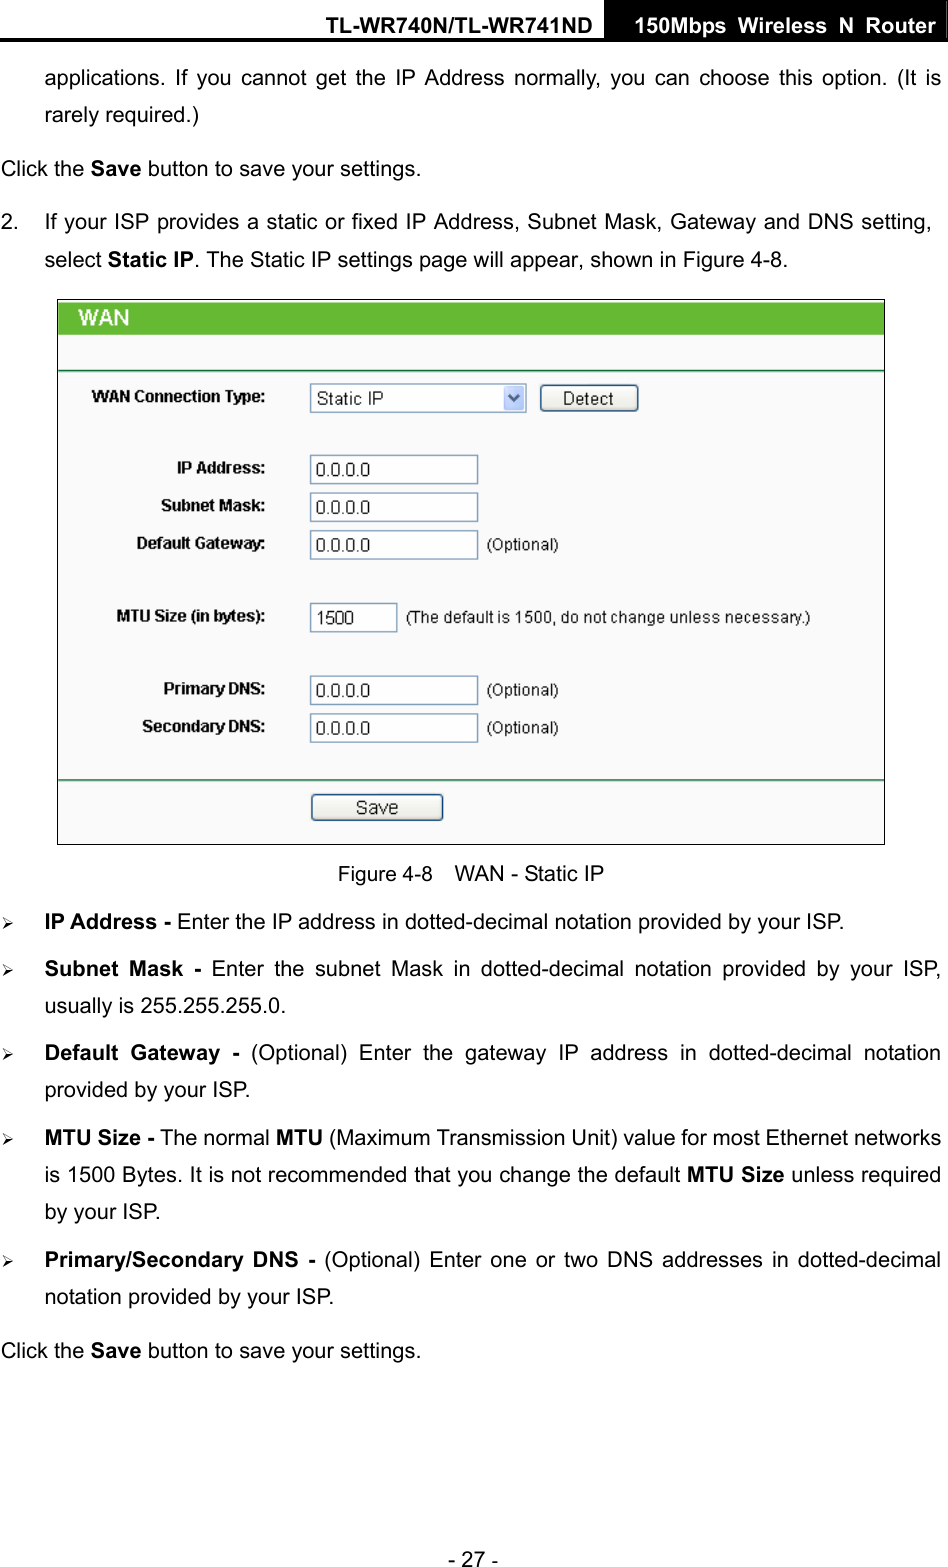 TL-WR740N/TL-WR741ND 150Mbps Wireless N Router - 27 - applications. If you cannot get the IP Address normally, you can choose this option. (It is rarely required.) Click the Save button to save your settings. 2.  If your ISP provides a static or fixed IP Address, Subnet Mask, Gateway and DNS setting, select Static IP. The Static IP settings page will appear, shown in Figure 4-8.  Figure 4-8    WAN - Static IP ¾ IP Address - Enter the IP address in dotted-decimal notation provided by your ISP. ¾ Subnet Mask - Enter the subnet Mask in dotted-decimal notation provided by your ISP, usually is 255.255.255.0. ¾ Default Gateway - (Optional) Enter the gateway IP address in dotted-decimal notation provided by your ISP. ¾ MTU Size - The normal MTU (Maximum Transmission Unit) value for most Ethernet networks is 1500 Bytes. It is not recommended that you change the default MTU Size unless required by your ISP.   ¾ Primary/Secondary DNS - (Optional) Enter one or two DNS addresses in dotted-decimal notation provided by your ISP. Click the Save button to save your settings. 